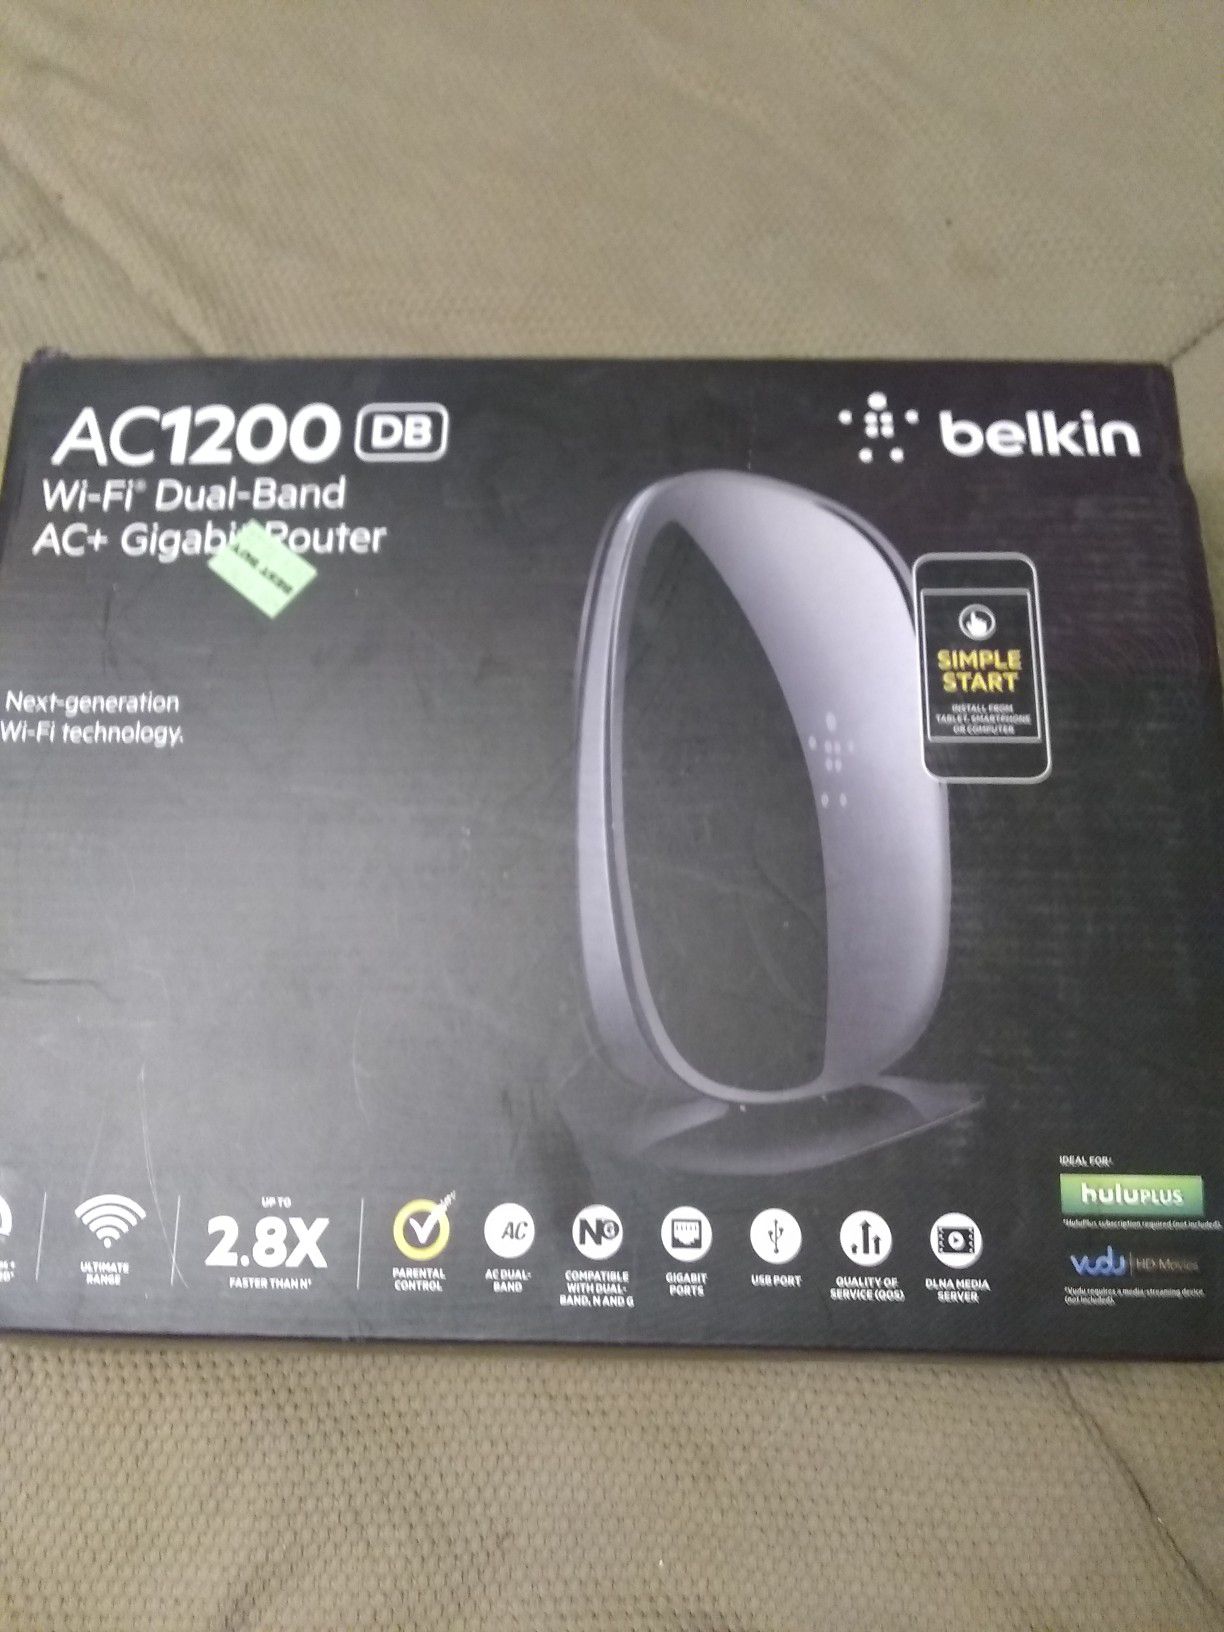 Brand New! Belkin Wi-Fi dual-band router$25obo